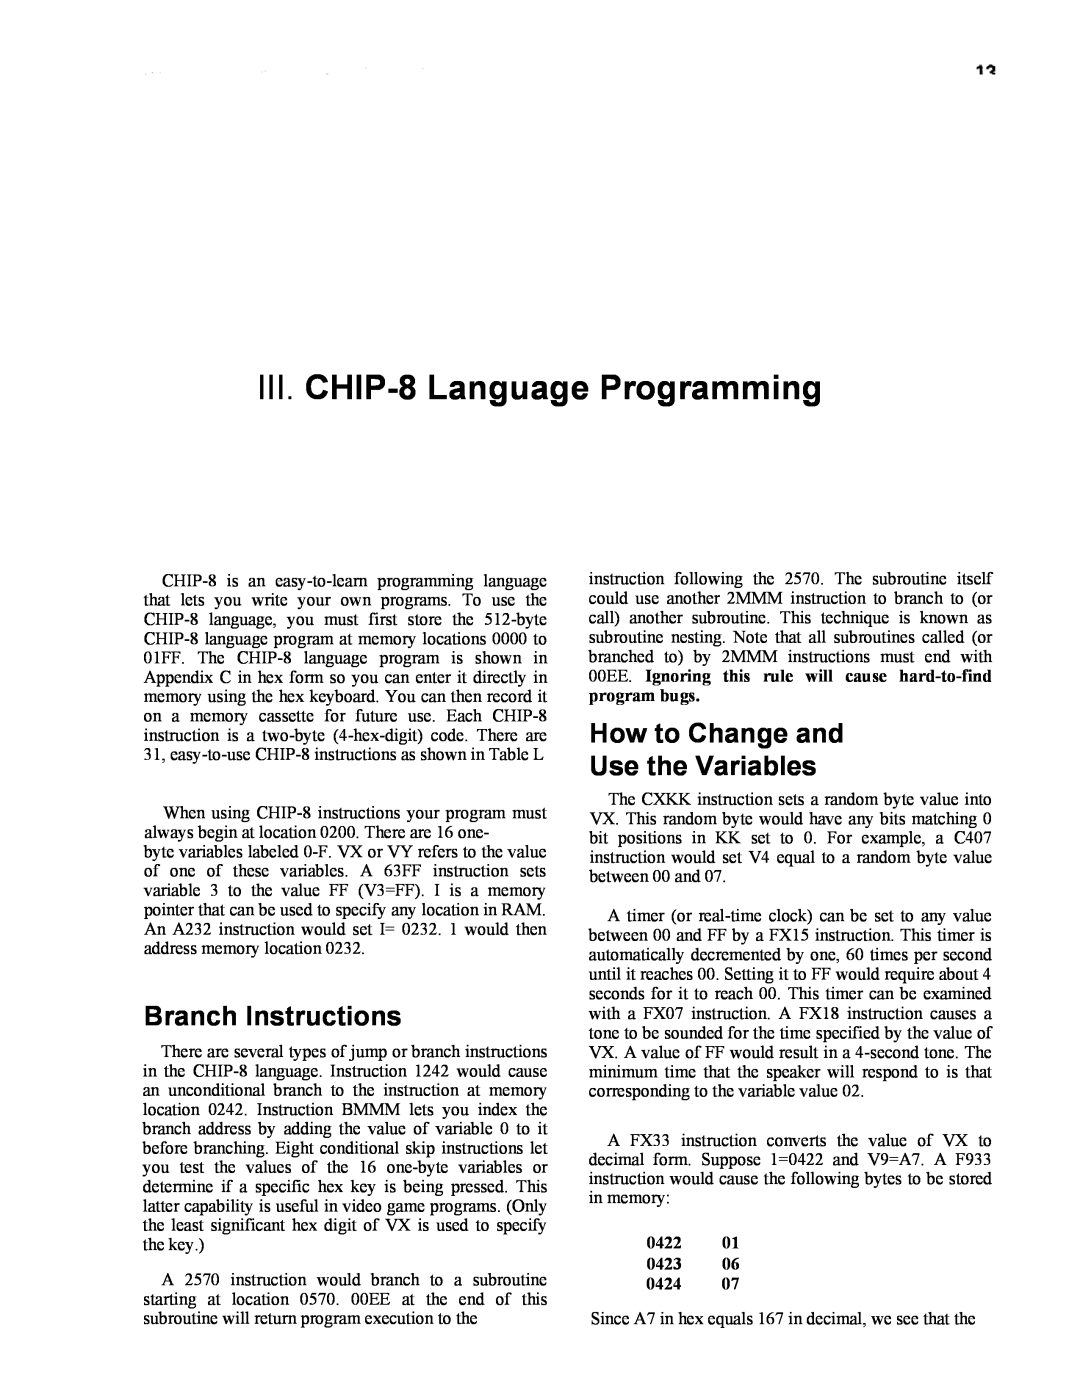 RCA CDP18S711 manual III.CHIP-8Language Programming, Branch Instructions, How to Change and Use the Variables 